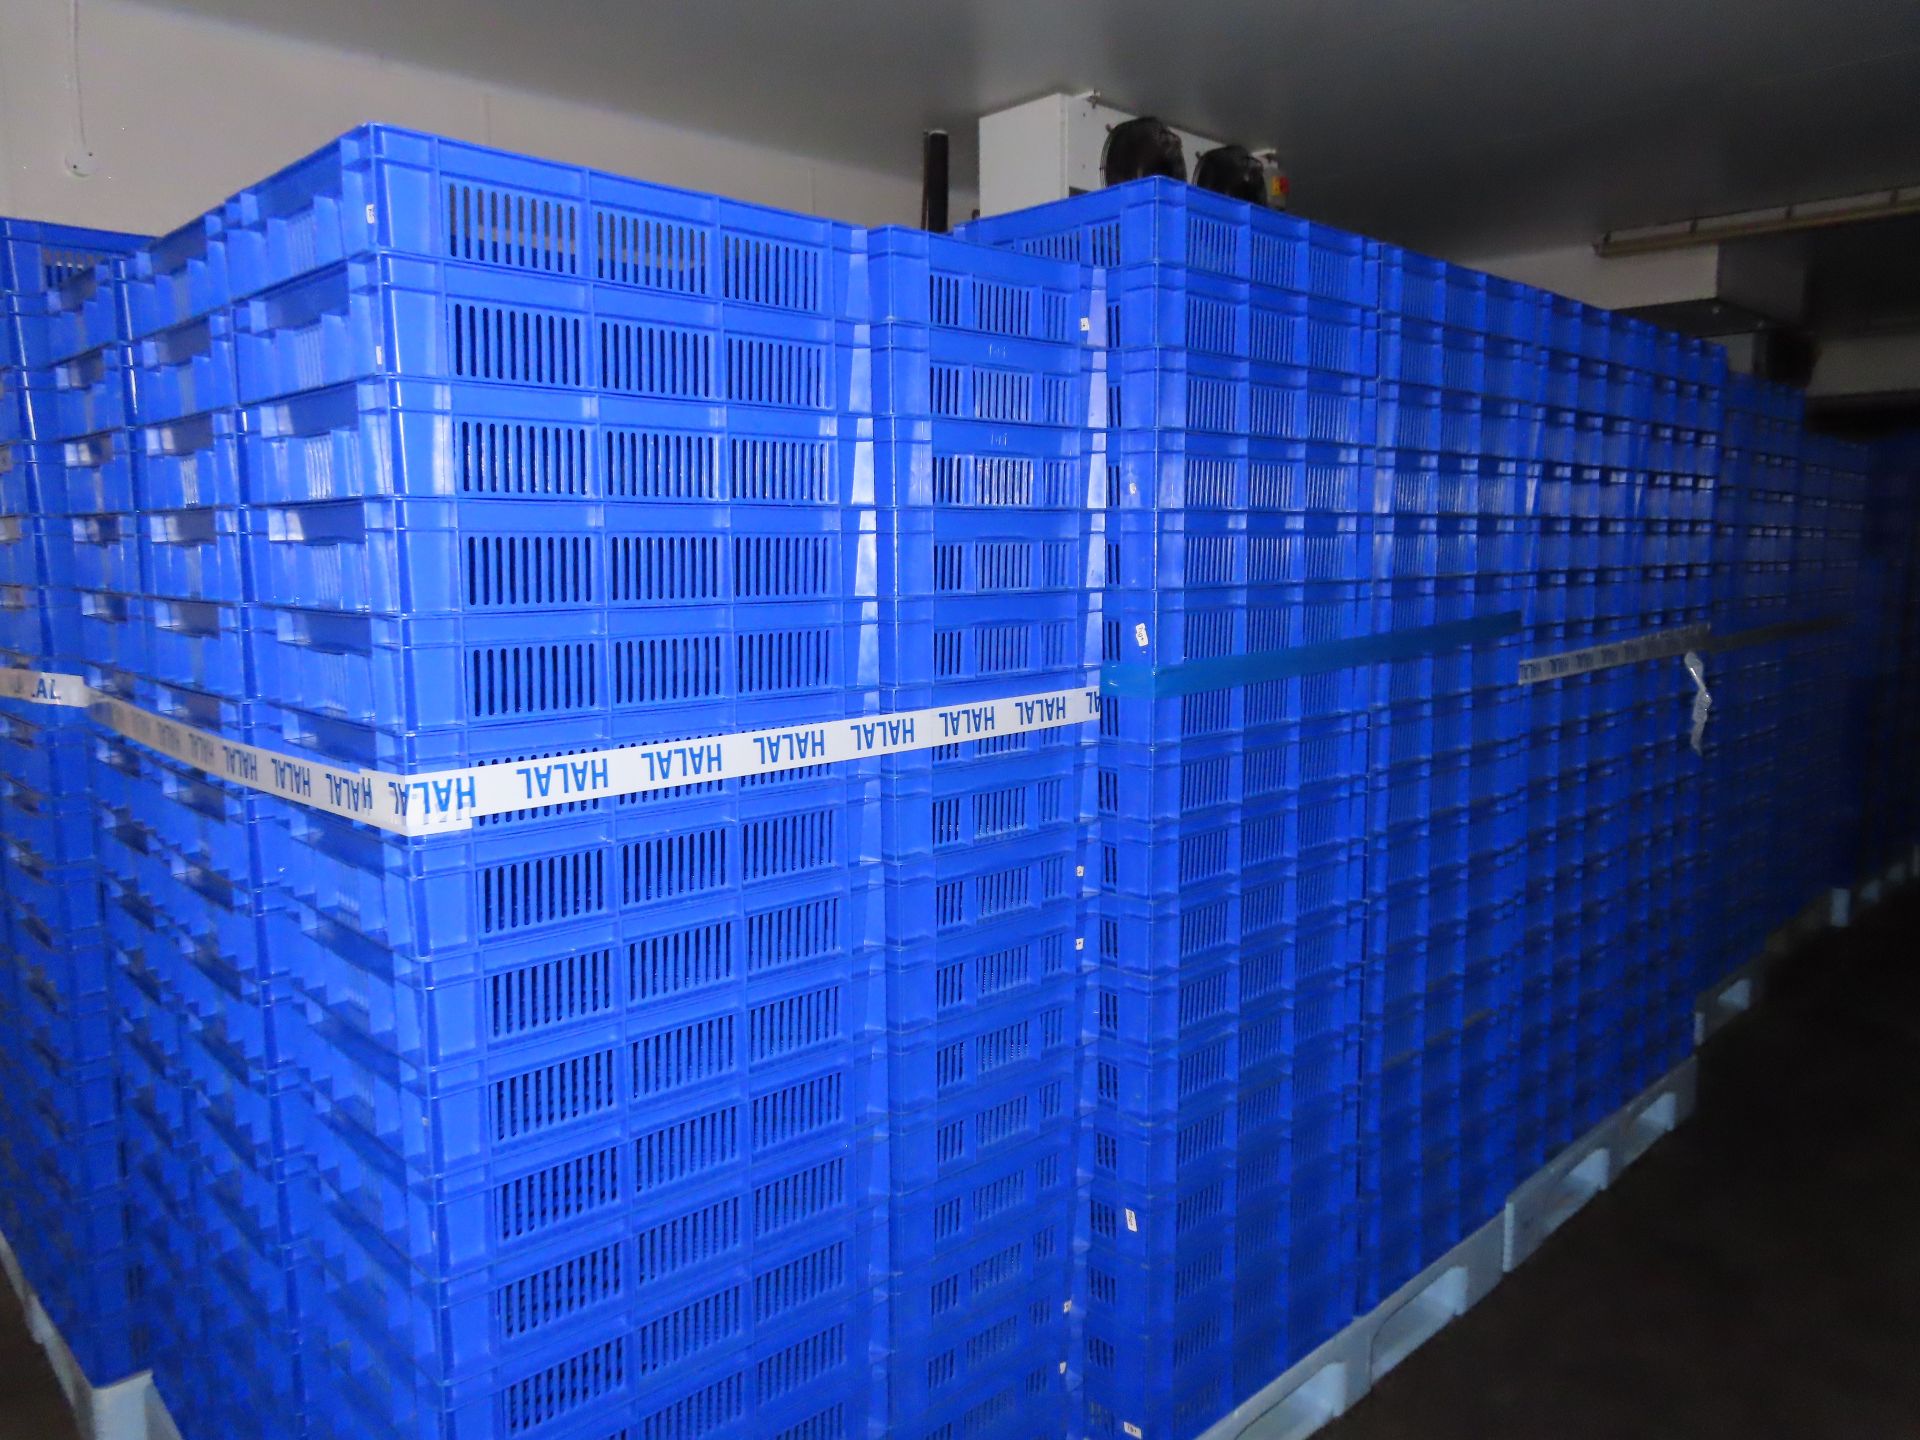 6 X PALLETS OF TRAYS (APPROX. 80 BLUE TRAYS ON EACH PALLET). - Image 6 of 6